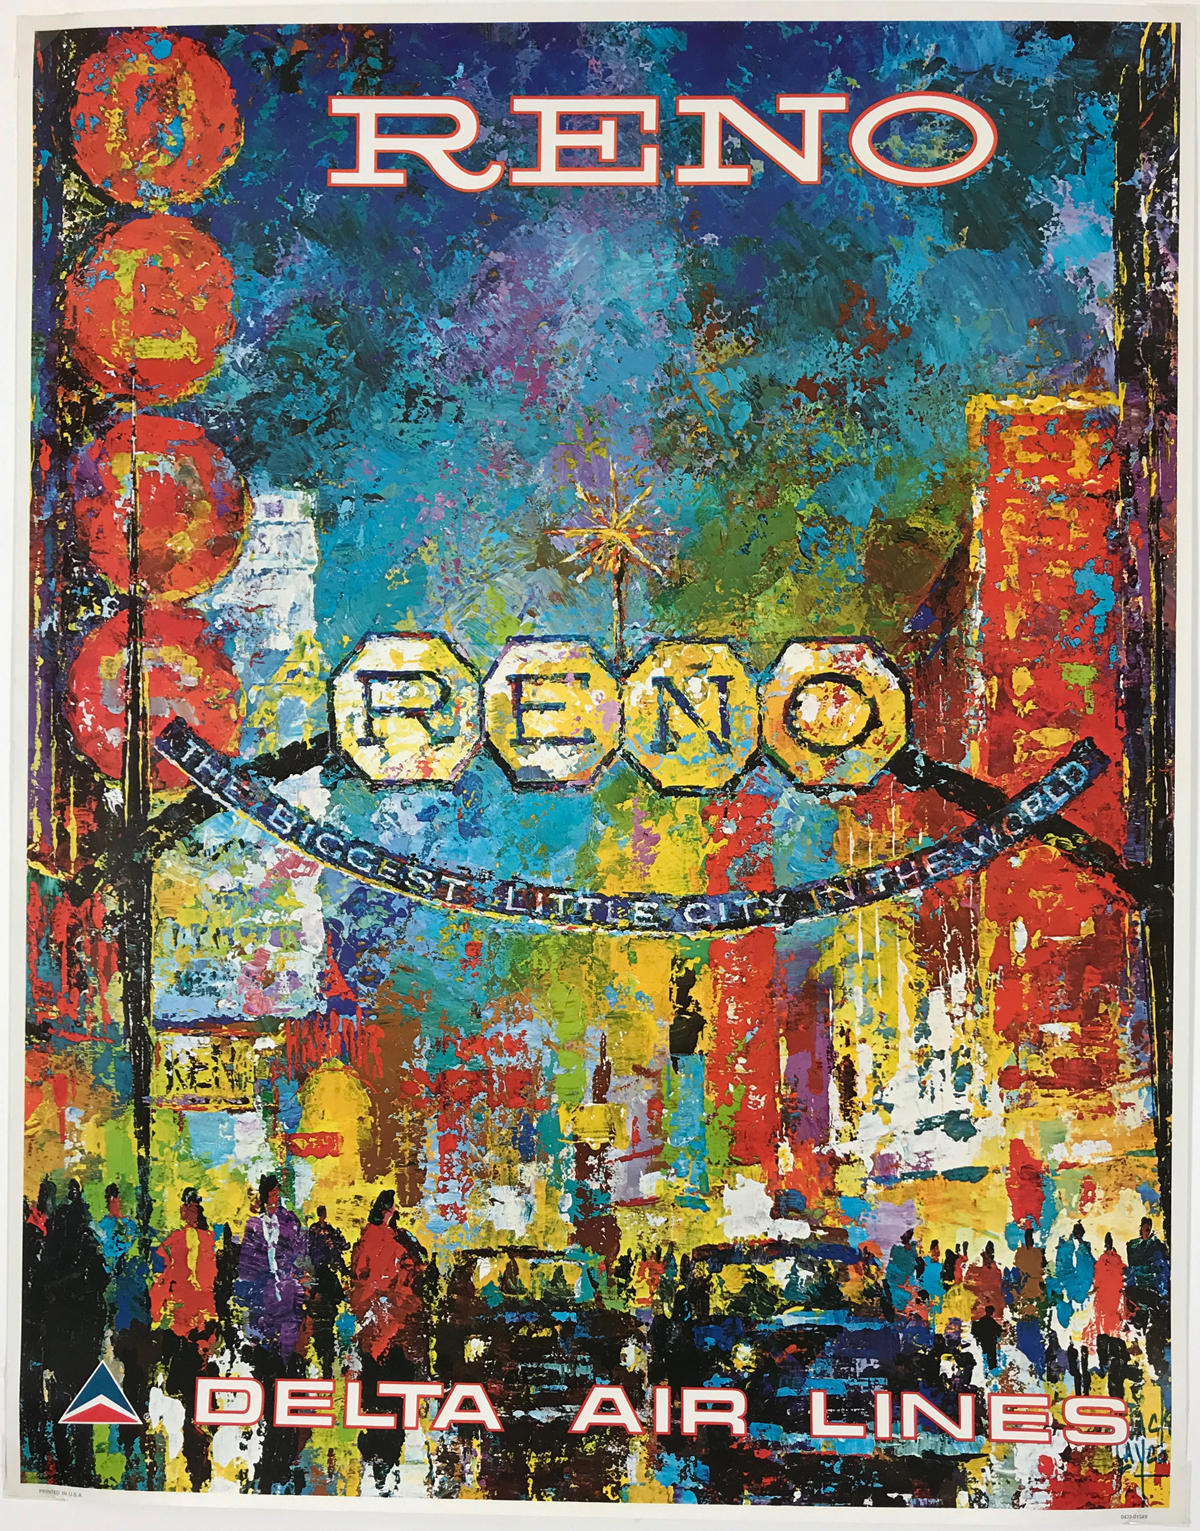 Delta Air Lines Reno by Jack Laycox Original 1976 Vintage American Passenger Airline Travel Advertisement Lithograph Poster.